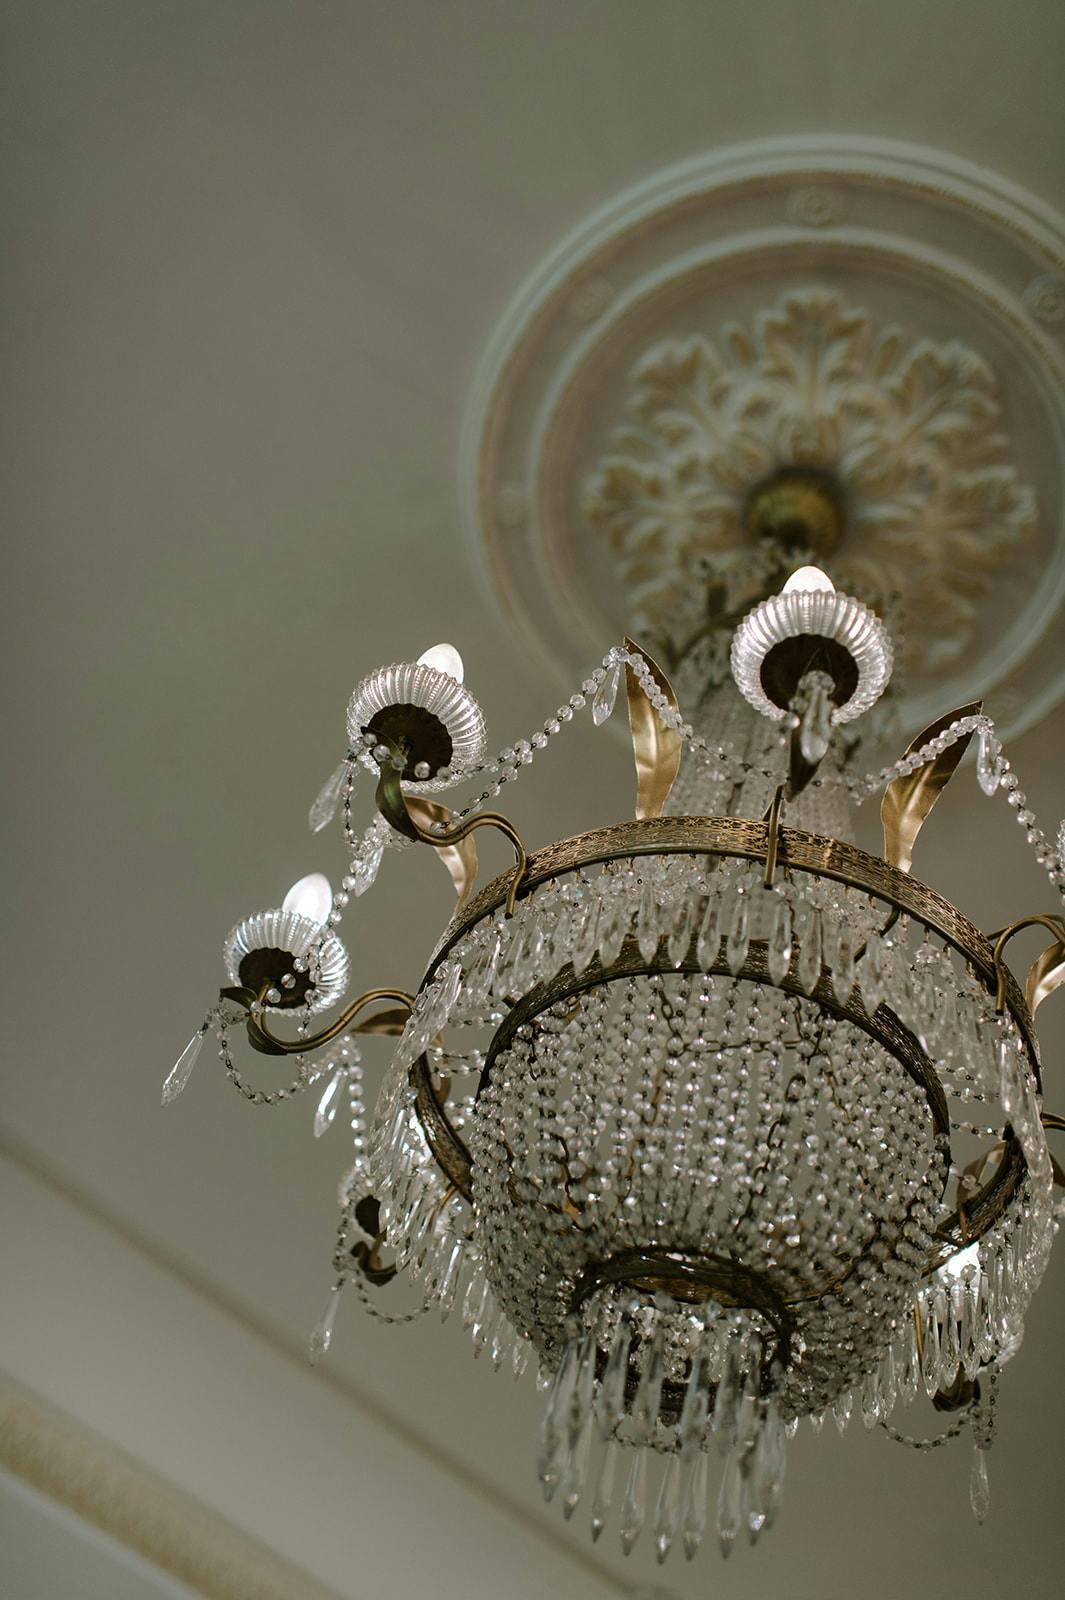 A close-up view of an ornate crystal chandelier with multiple tiers of hanging crystals, intricately designed metal arms, and candle-shaped light bulbs. The ceiling above features decorative molding. The chandelier is illuminated, casting a soft light.